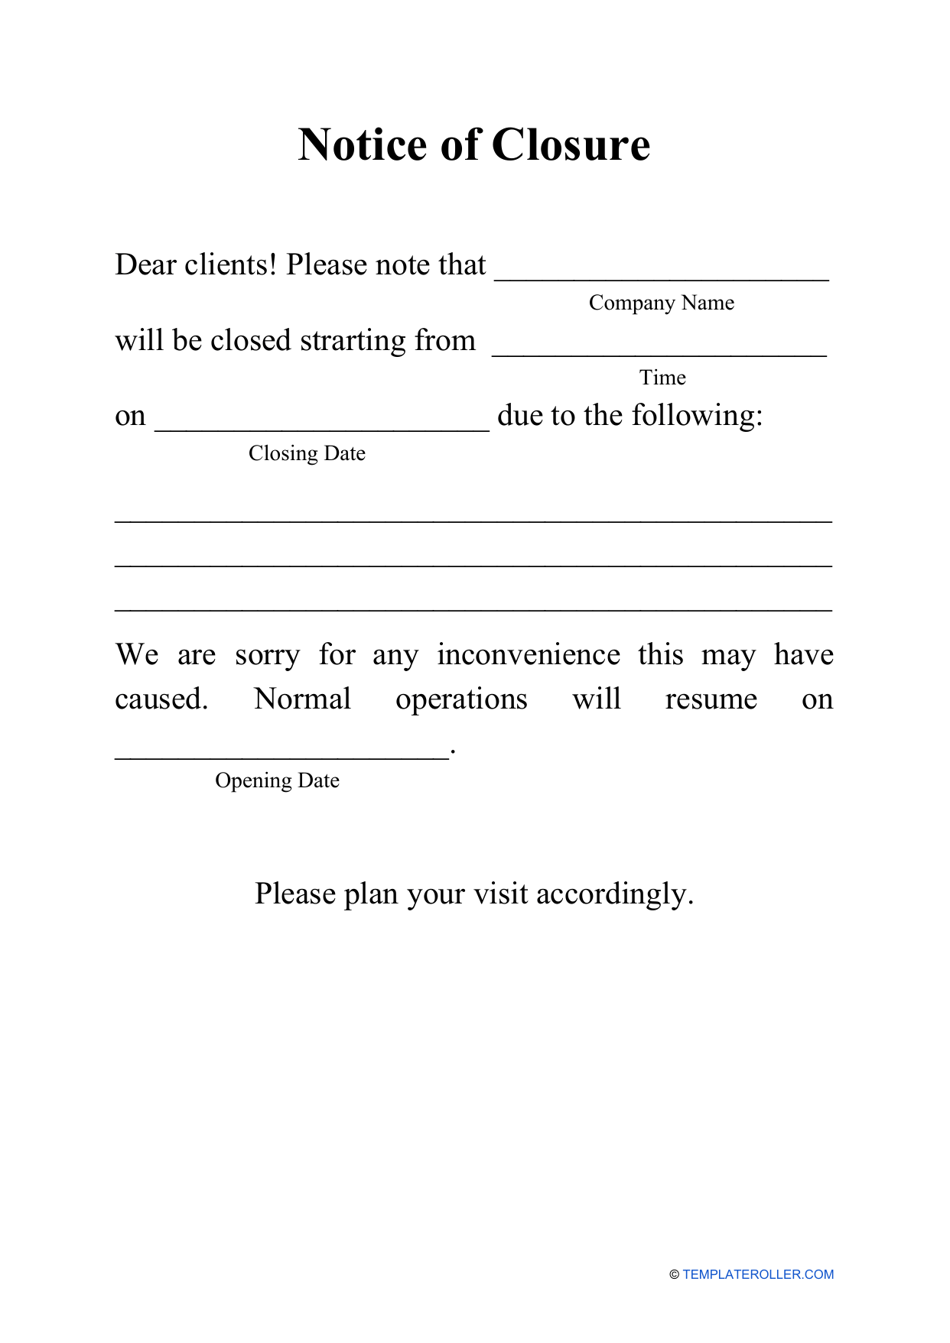 Notice of Closure Template Download Printable PDF  Templateroller For Business Closed Sign Template